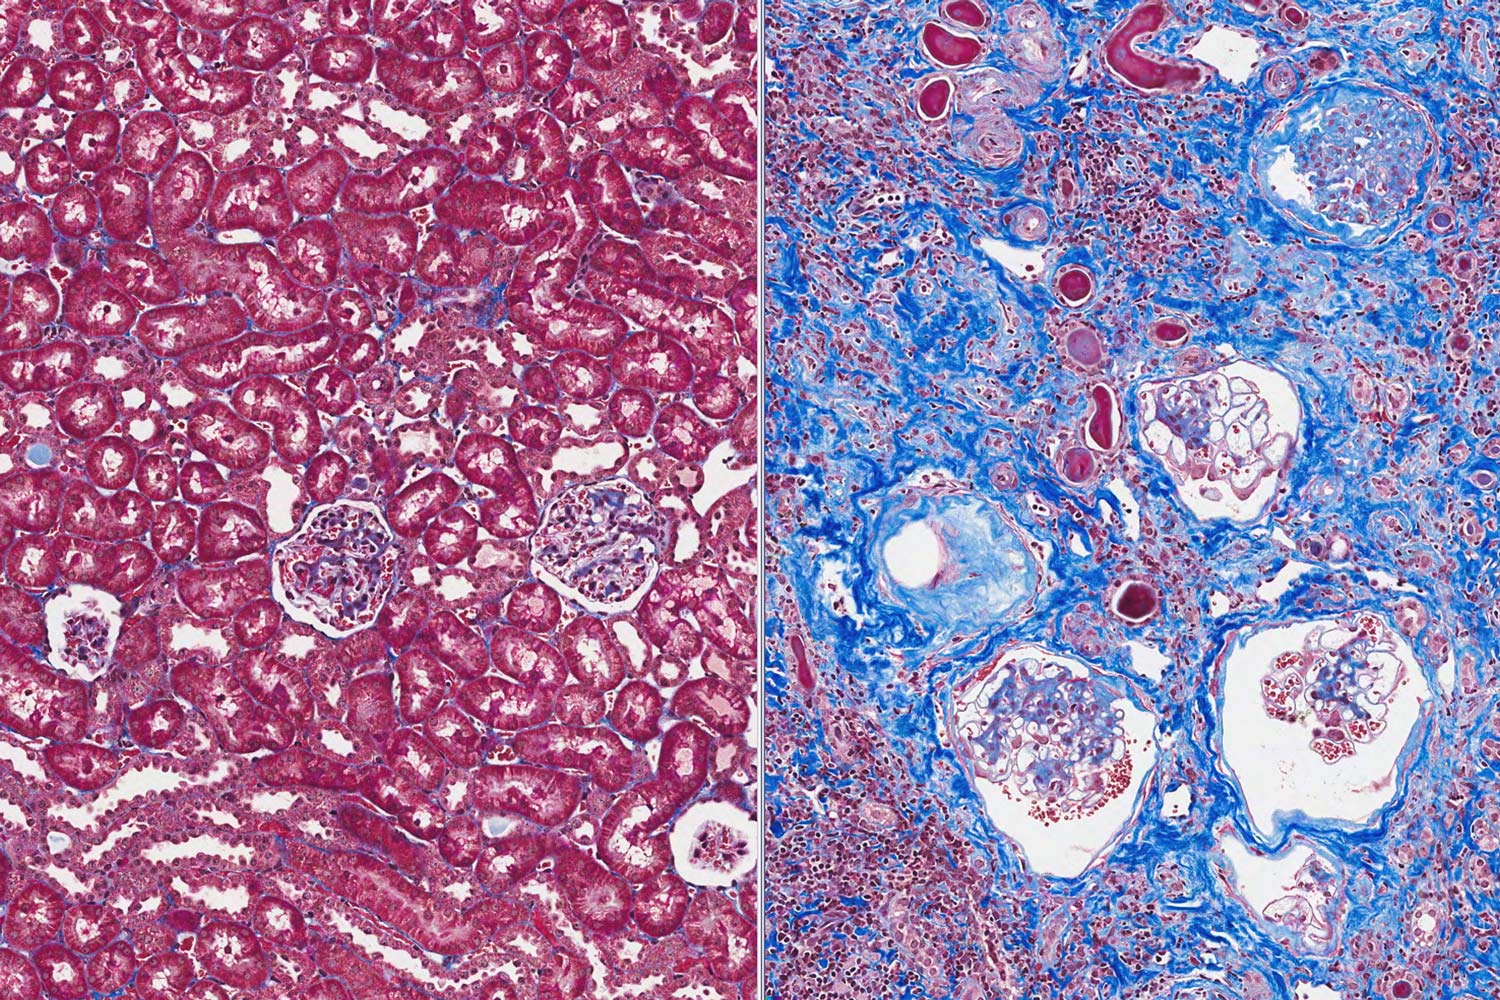 left: pink Fibrosis under a microscope. Right: pink and blue fibrosis under a microscope